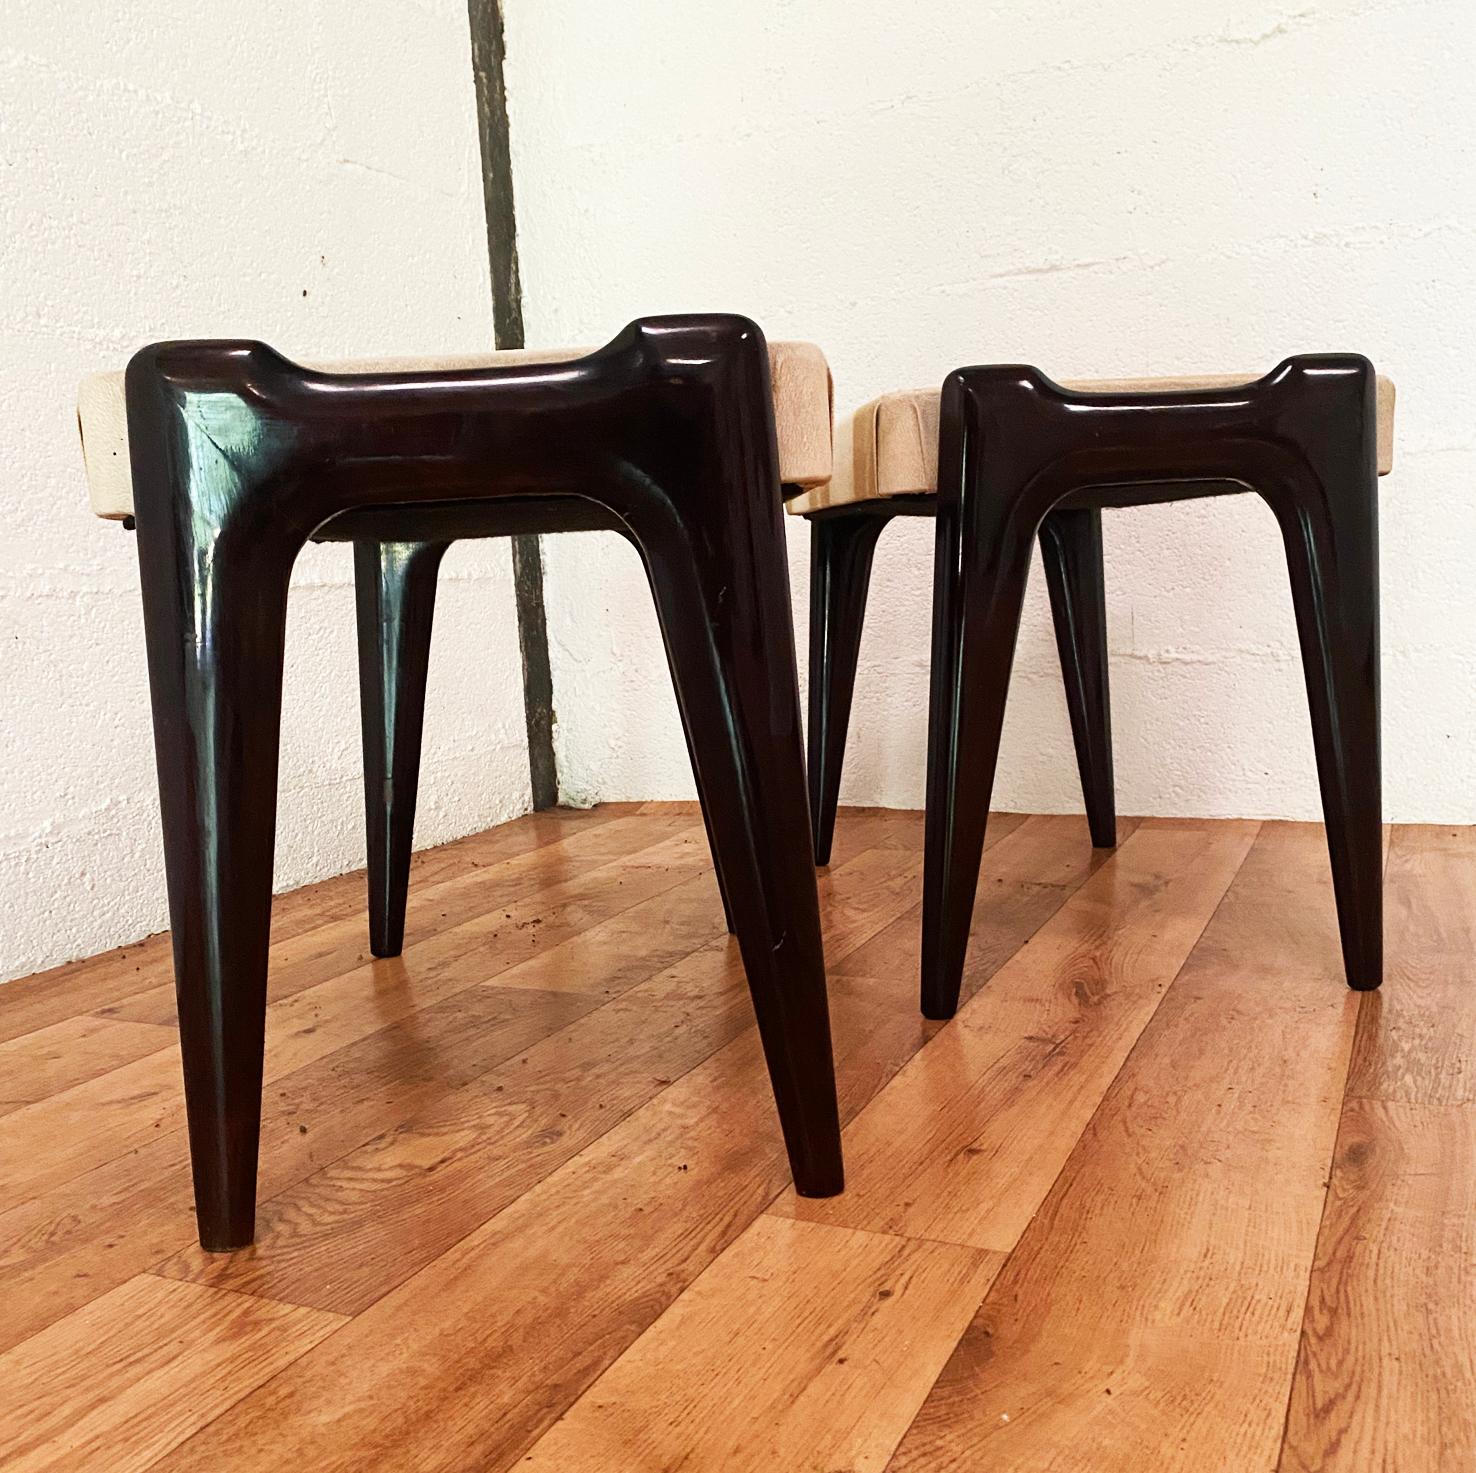 Pair of stools by Ico Parisi for Cantù Italy 60s
 Dimensions: 55 cm x 35 cm x 42 cm 
These benches are superb, the fabric is stain-free, the set is in great condition.
Ico Parisi editor : Cantù
